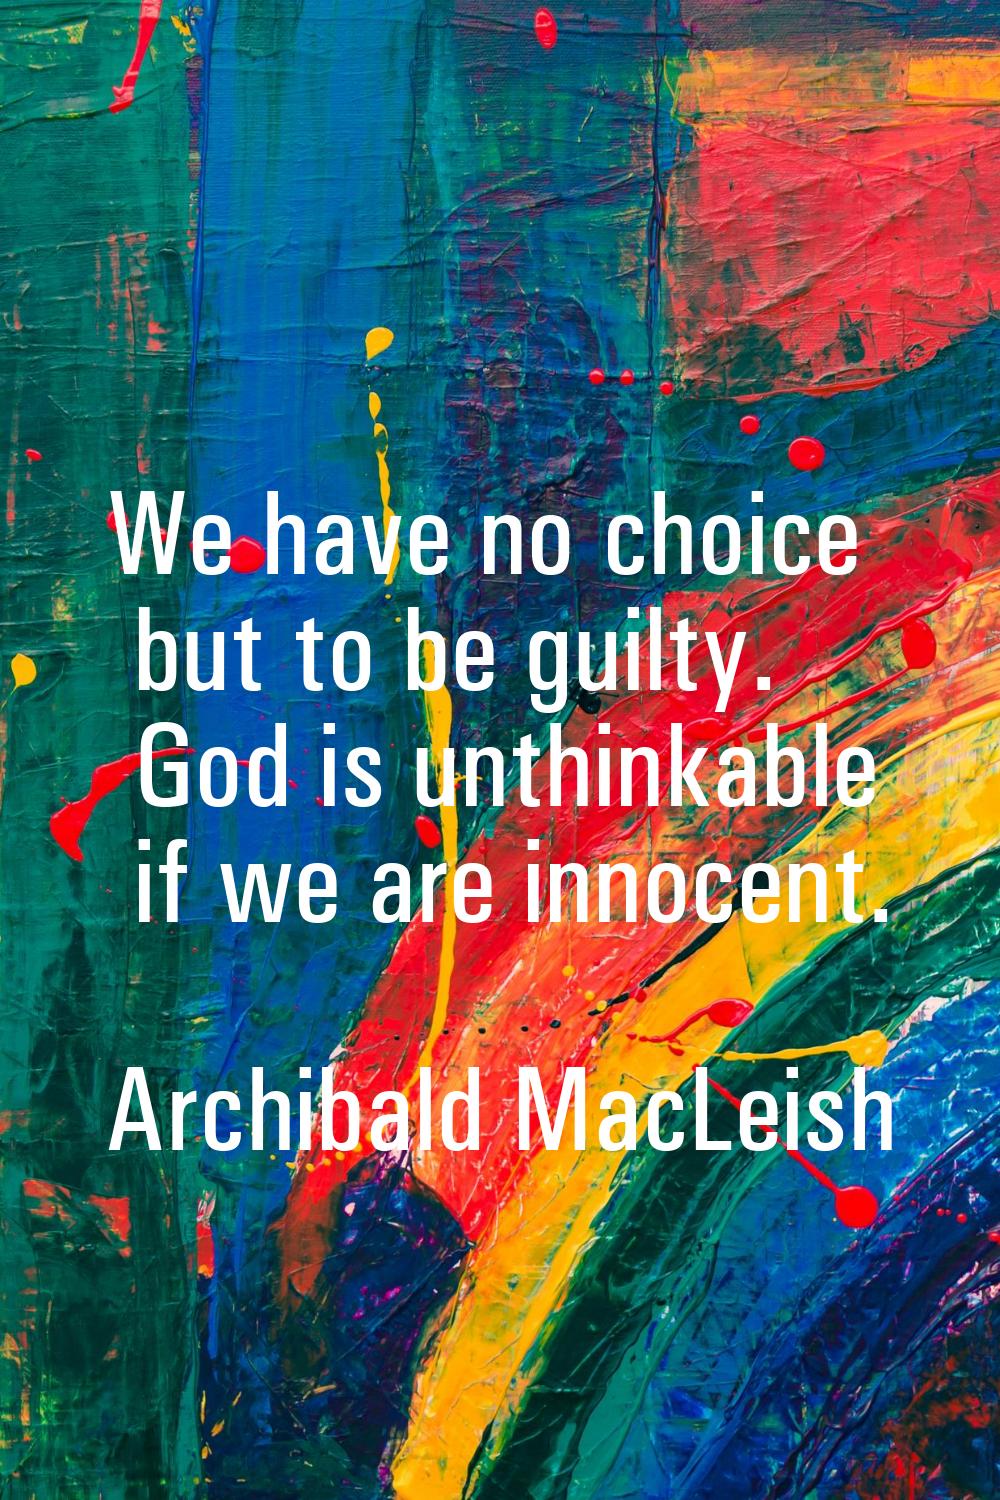 We have no choice but to be guilty. God is unthinkable if we are innocent.